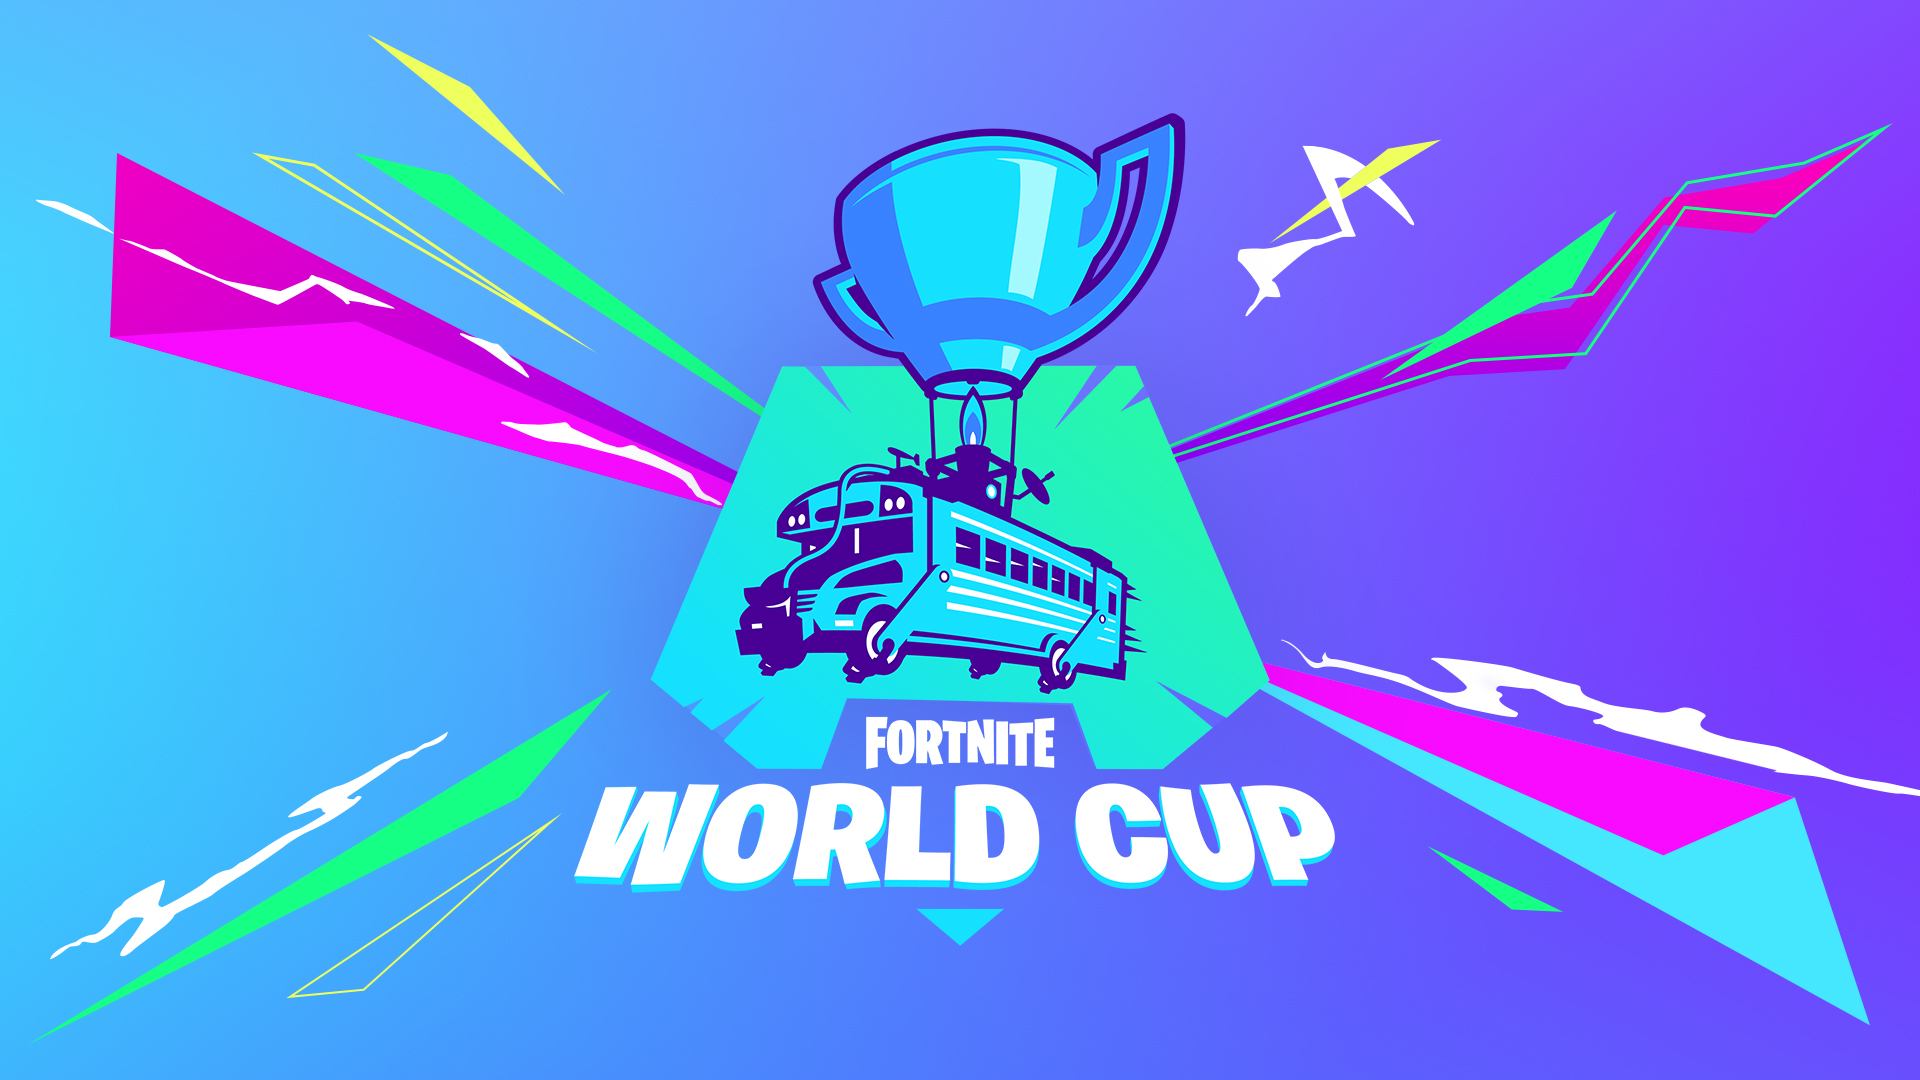 Fortnite World Cup Details and $000 Competitive Prize Pool for 2019